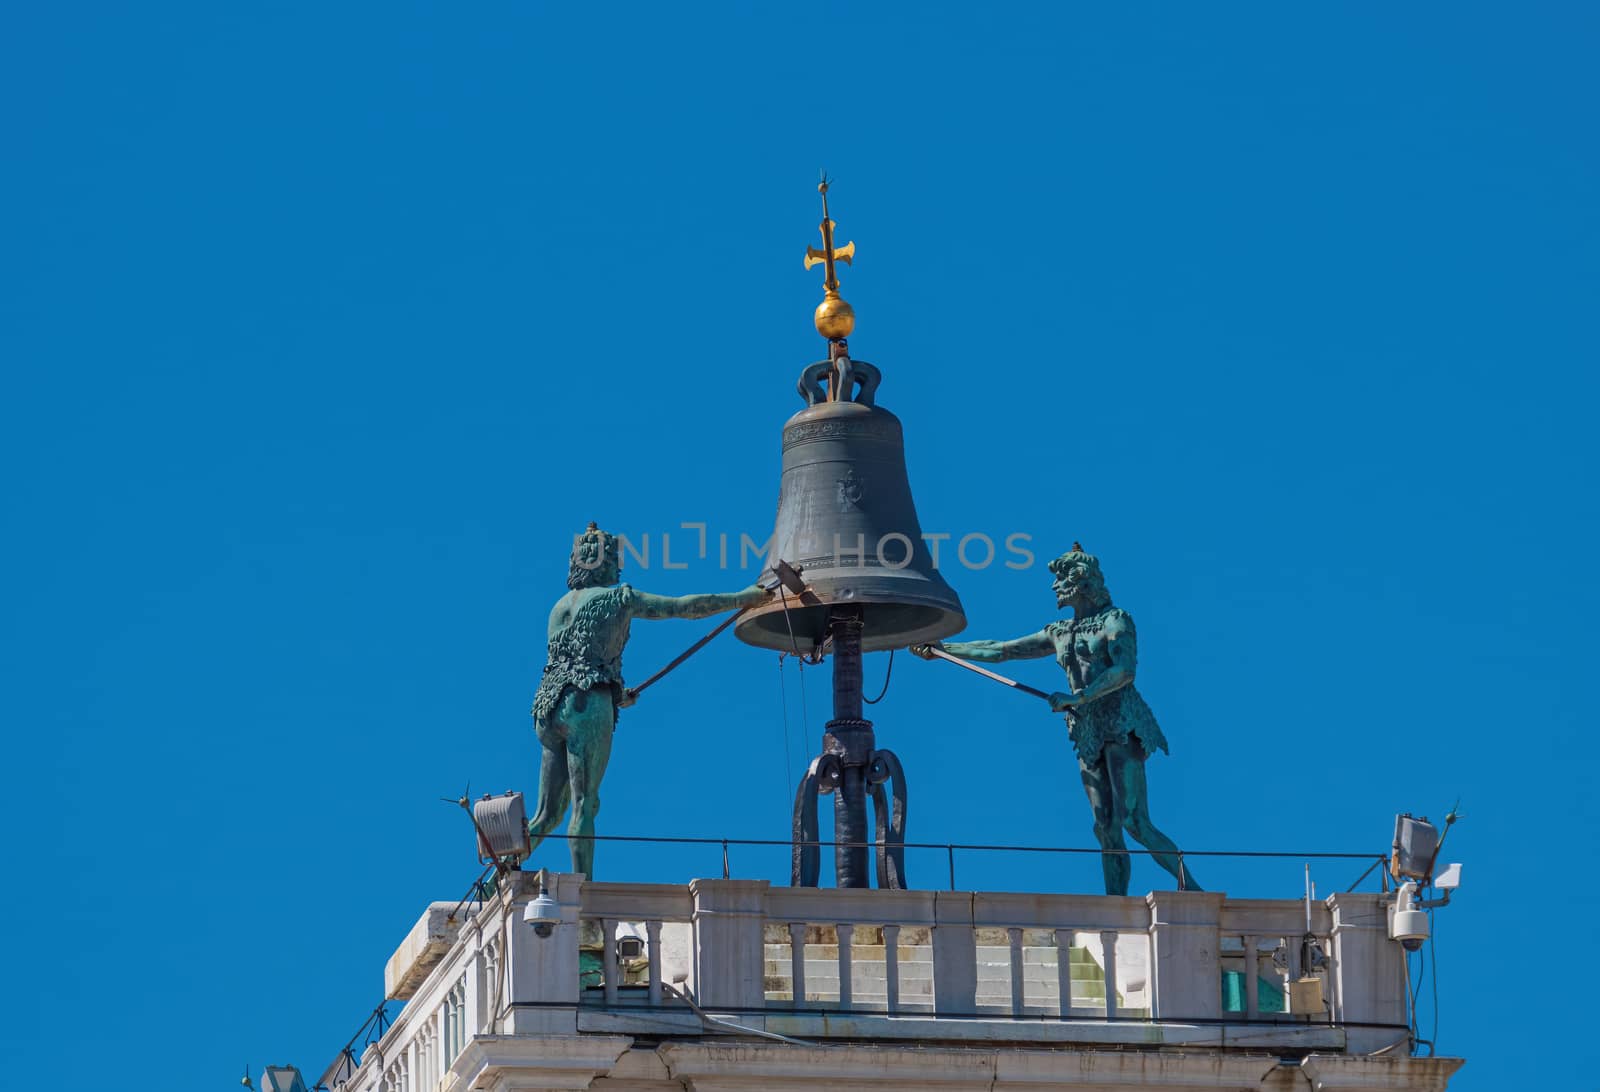 Old bronze bell at the top of St Mark's clocktower at piazza San Marco in Venice, Italy by COffe